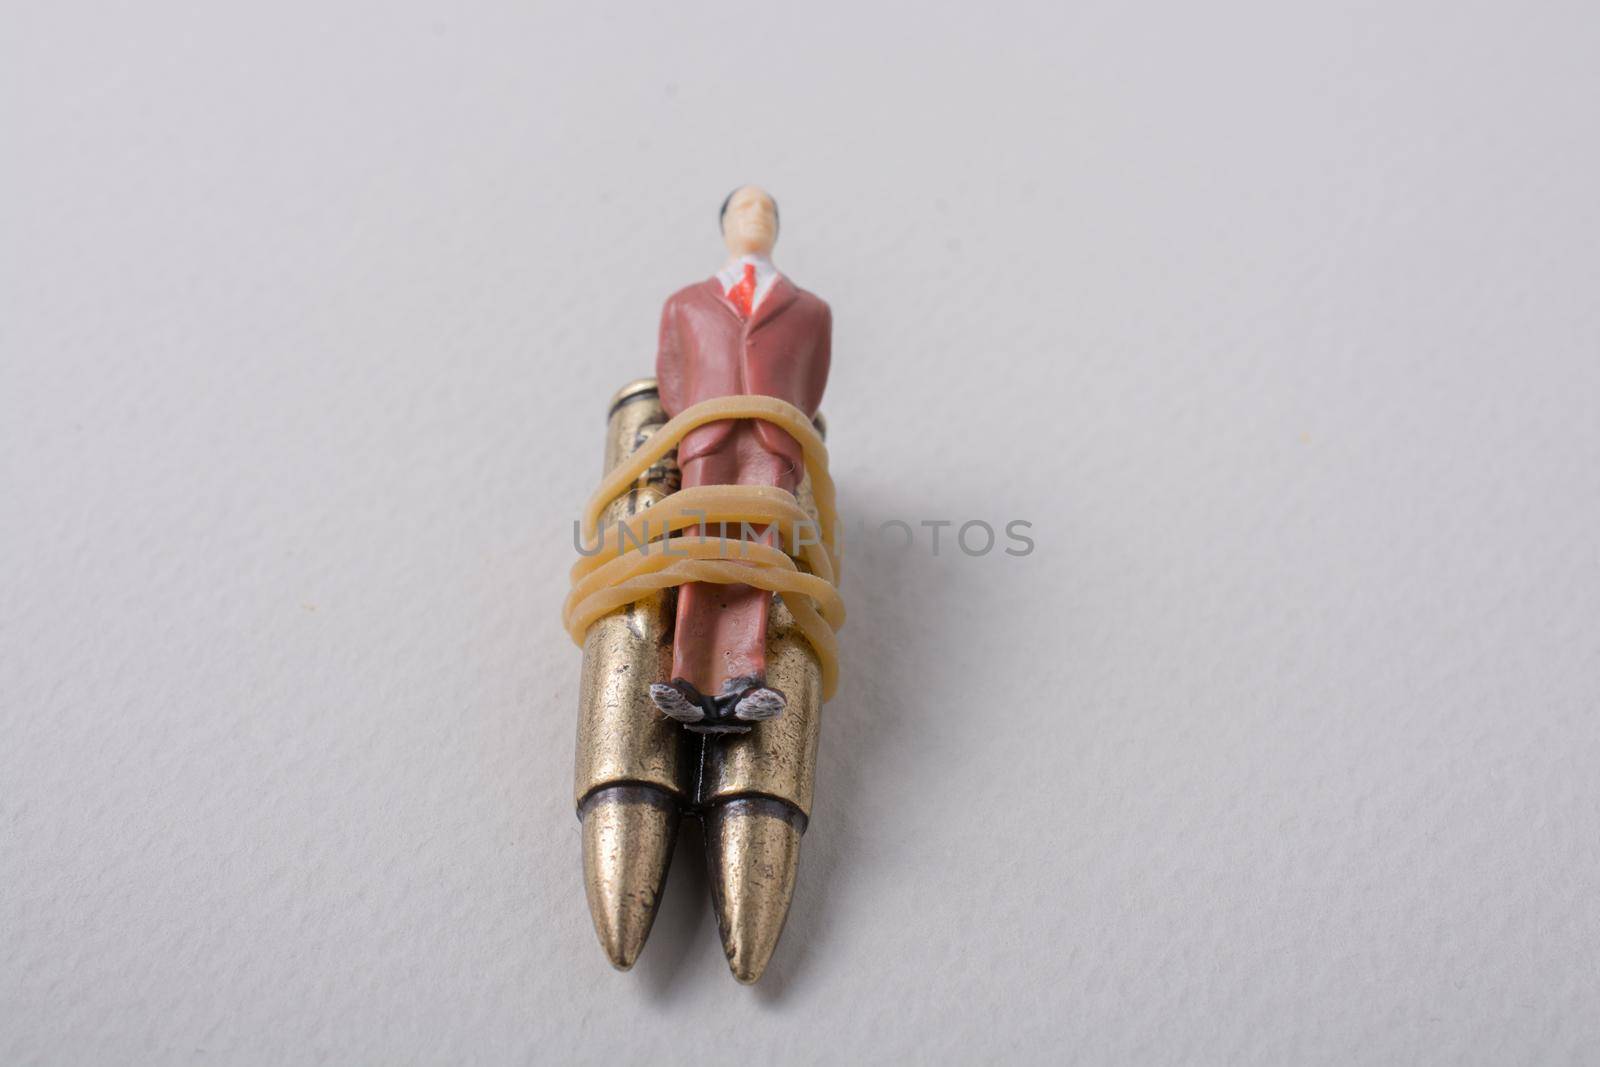 Man figurine tied to a  Bullet as anti-war photography